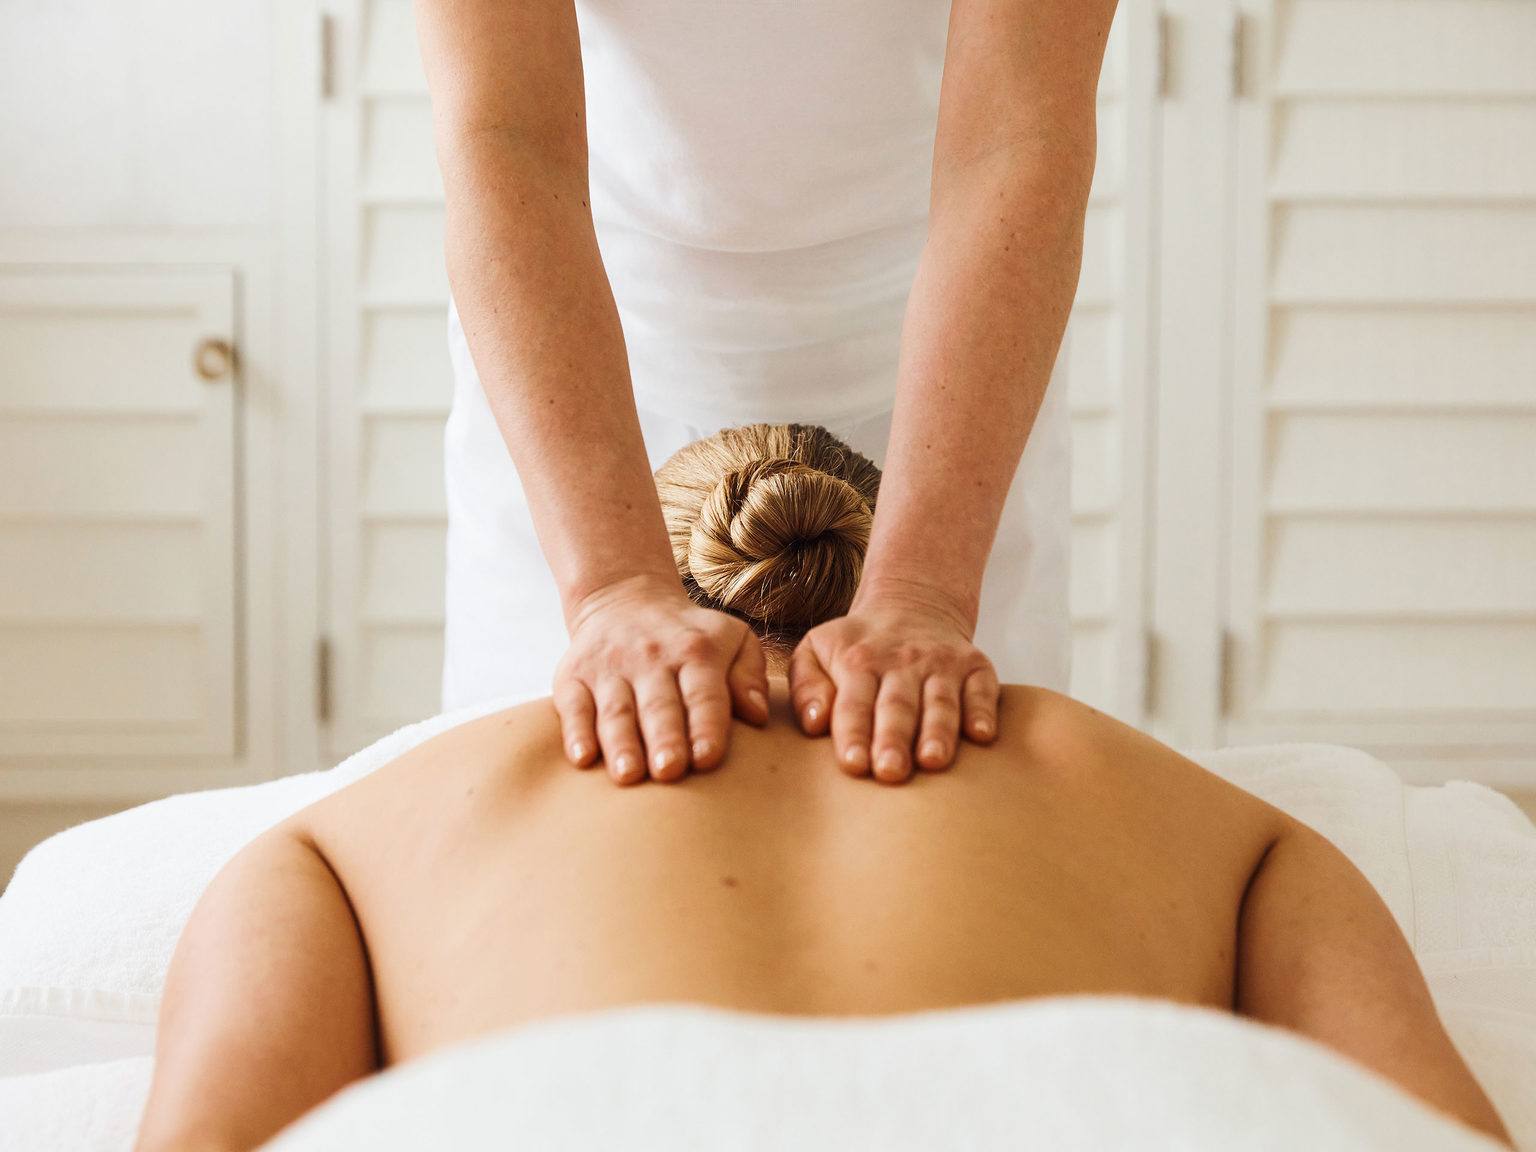 A woman having a back massage during a spa day